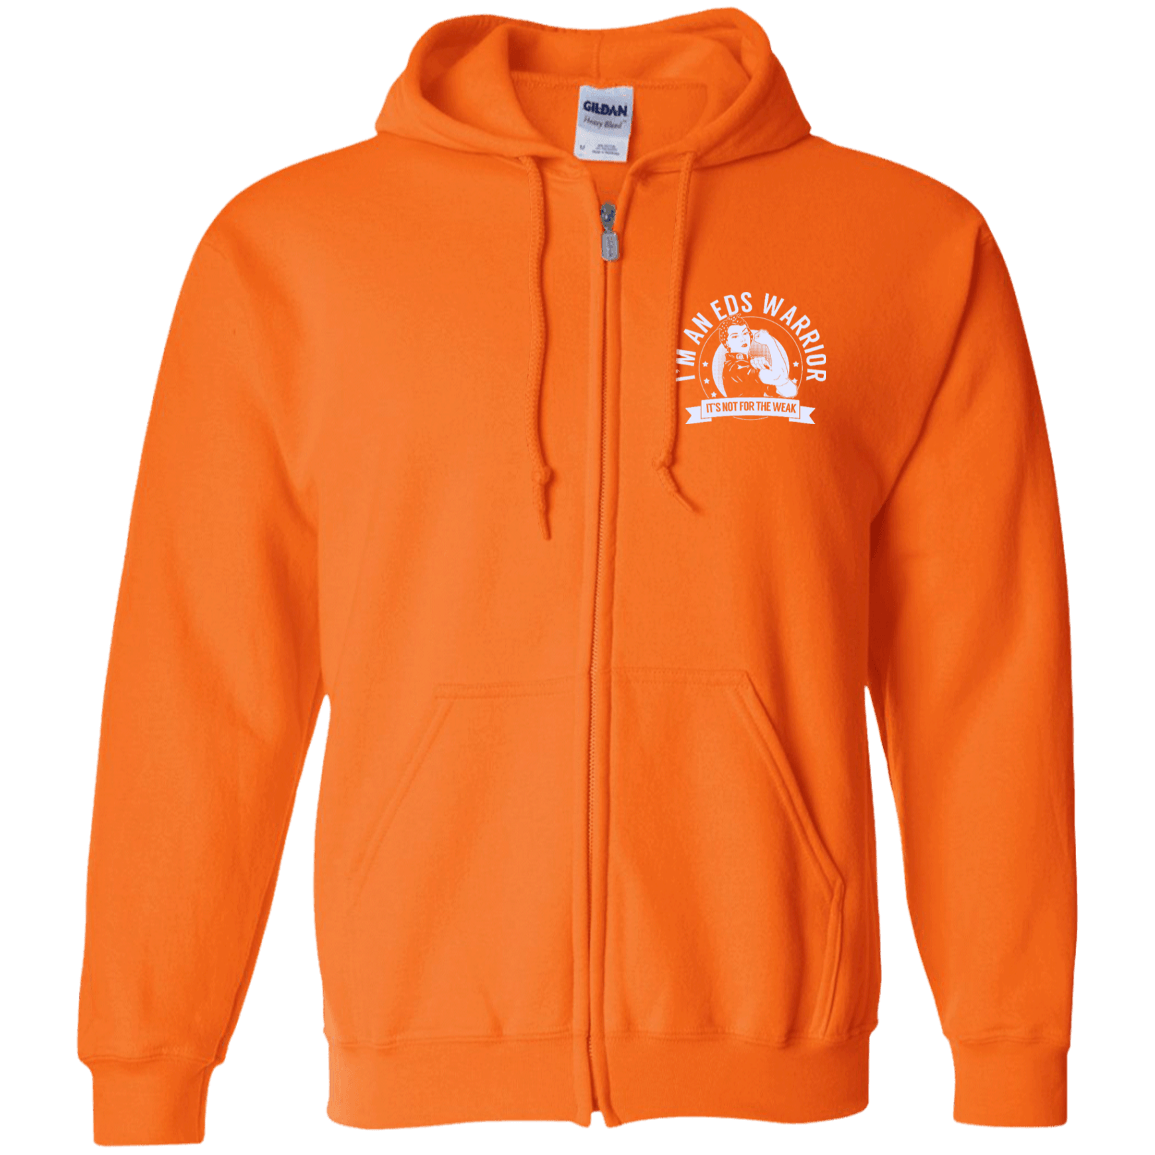 Ehlers Danlos Syndrome - EDS Warrior NFTW Zip Up Hooded Sweatshirt - The Unchargeables